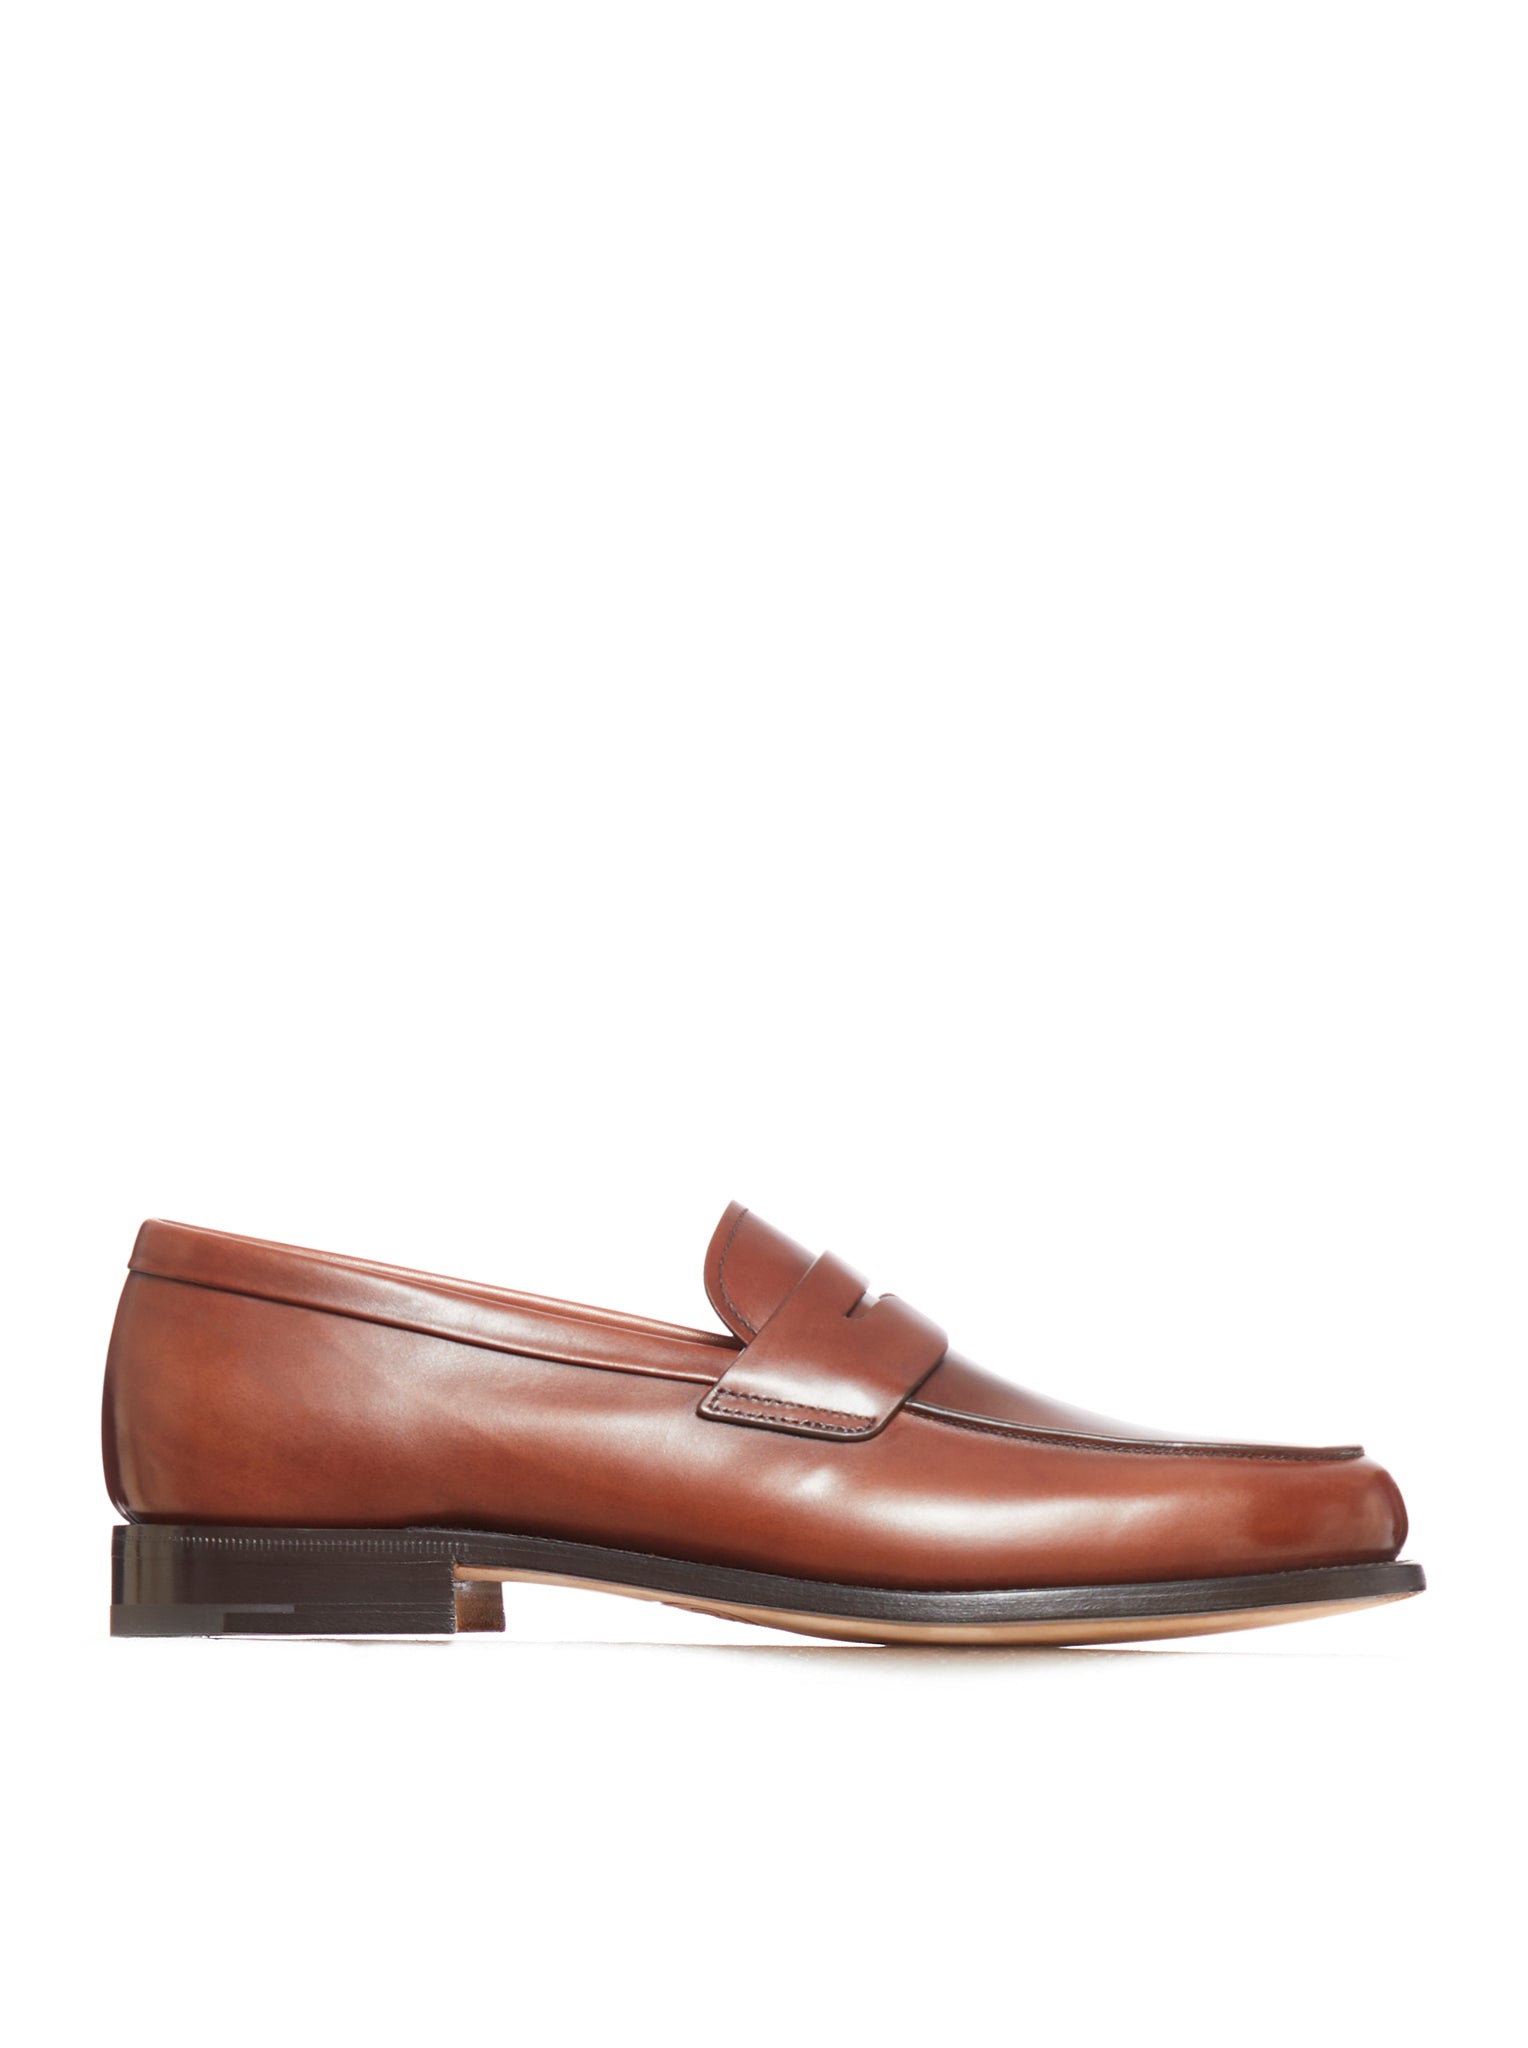 Milford leather penny loafers